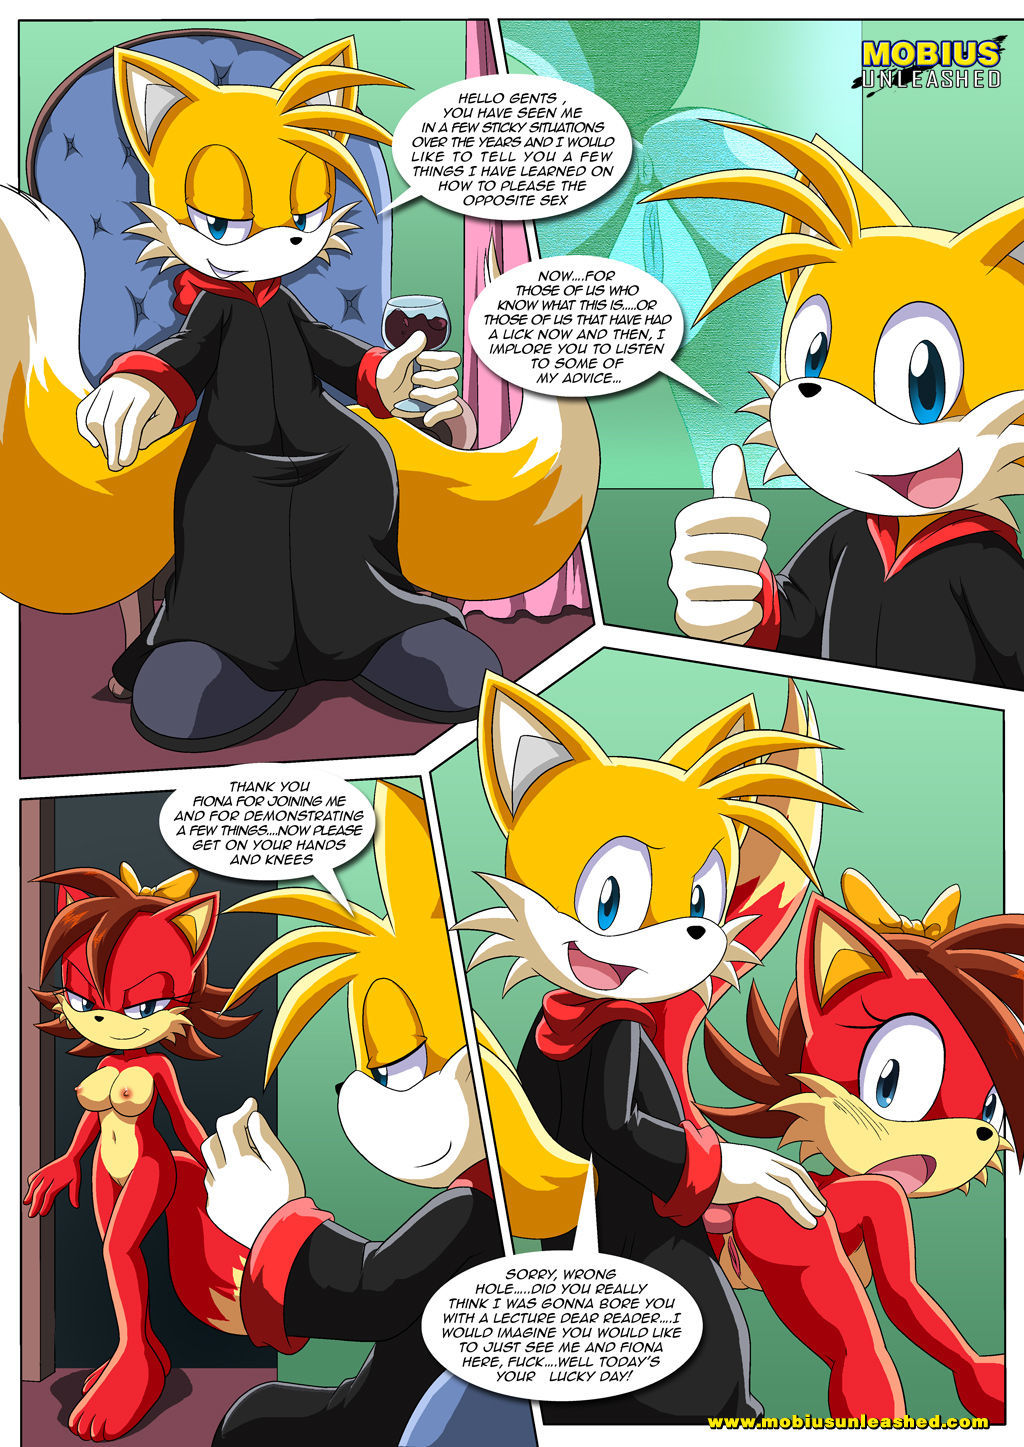 The Prower Family Affair (Sonic The Hedgehog) by Palcomix page 2